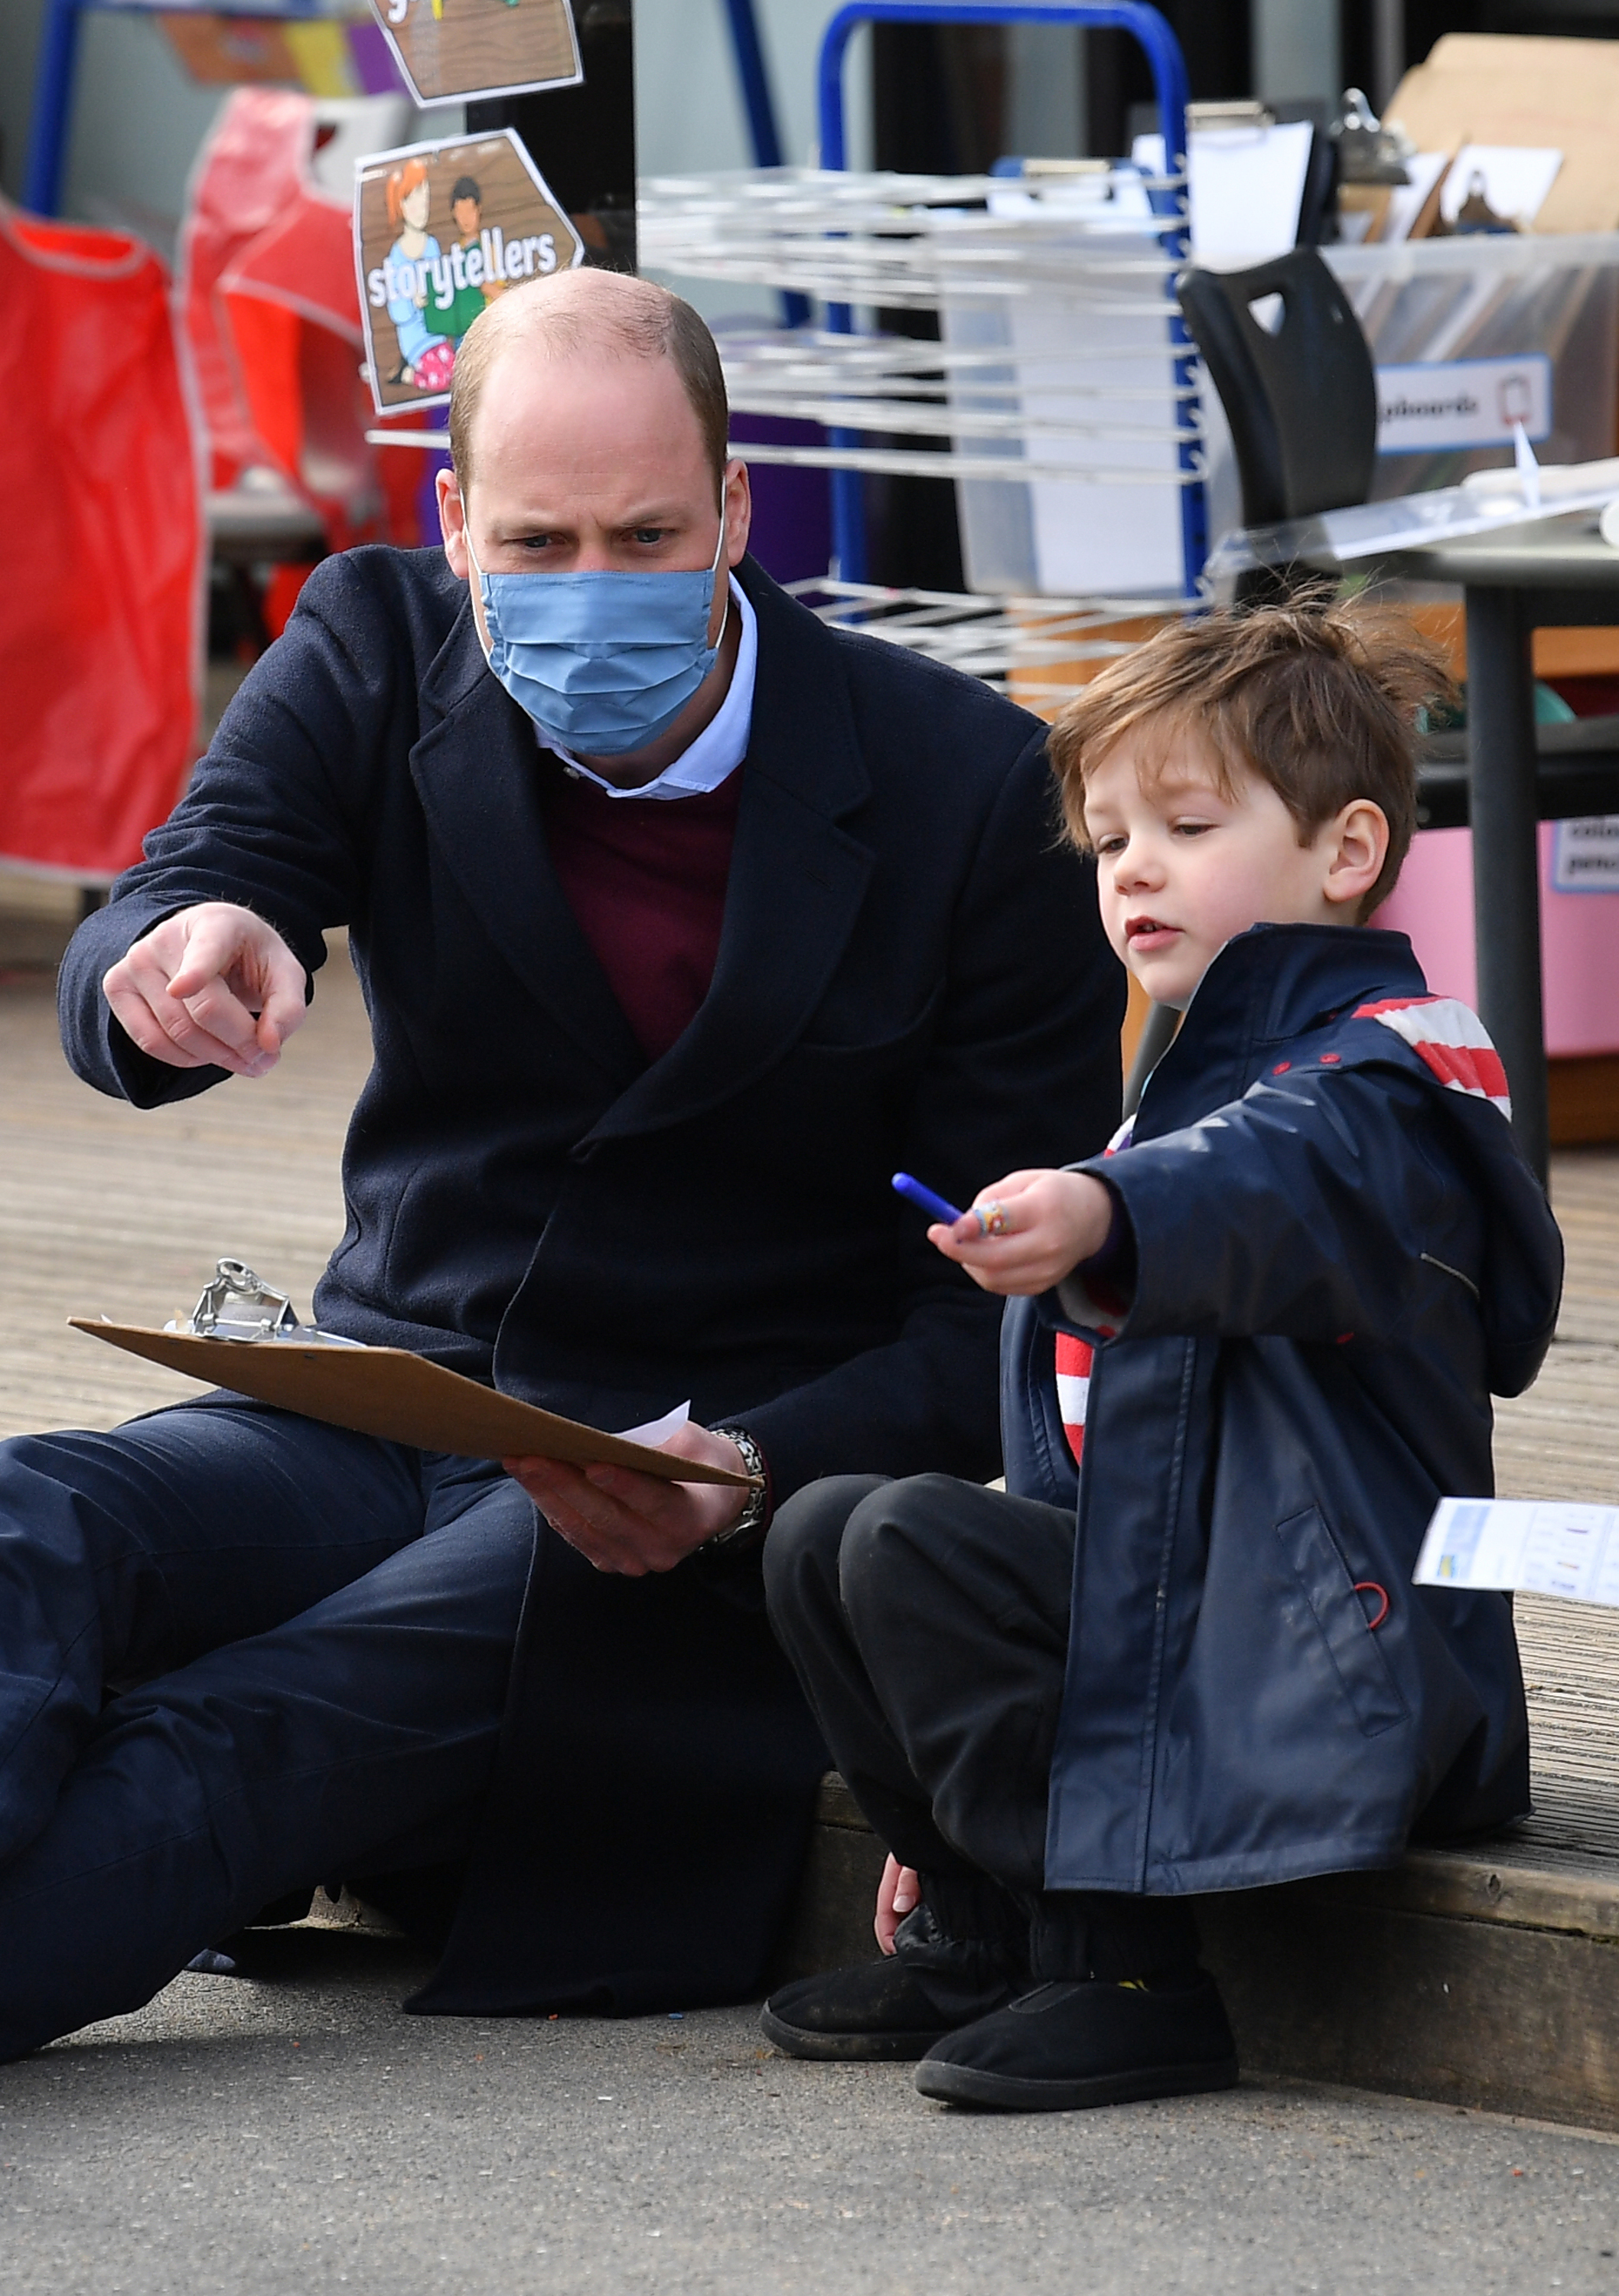 The Duke of Cambridge plays with a child in the playground during a visit to School 21. Photo: PA